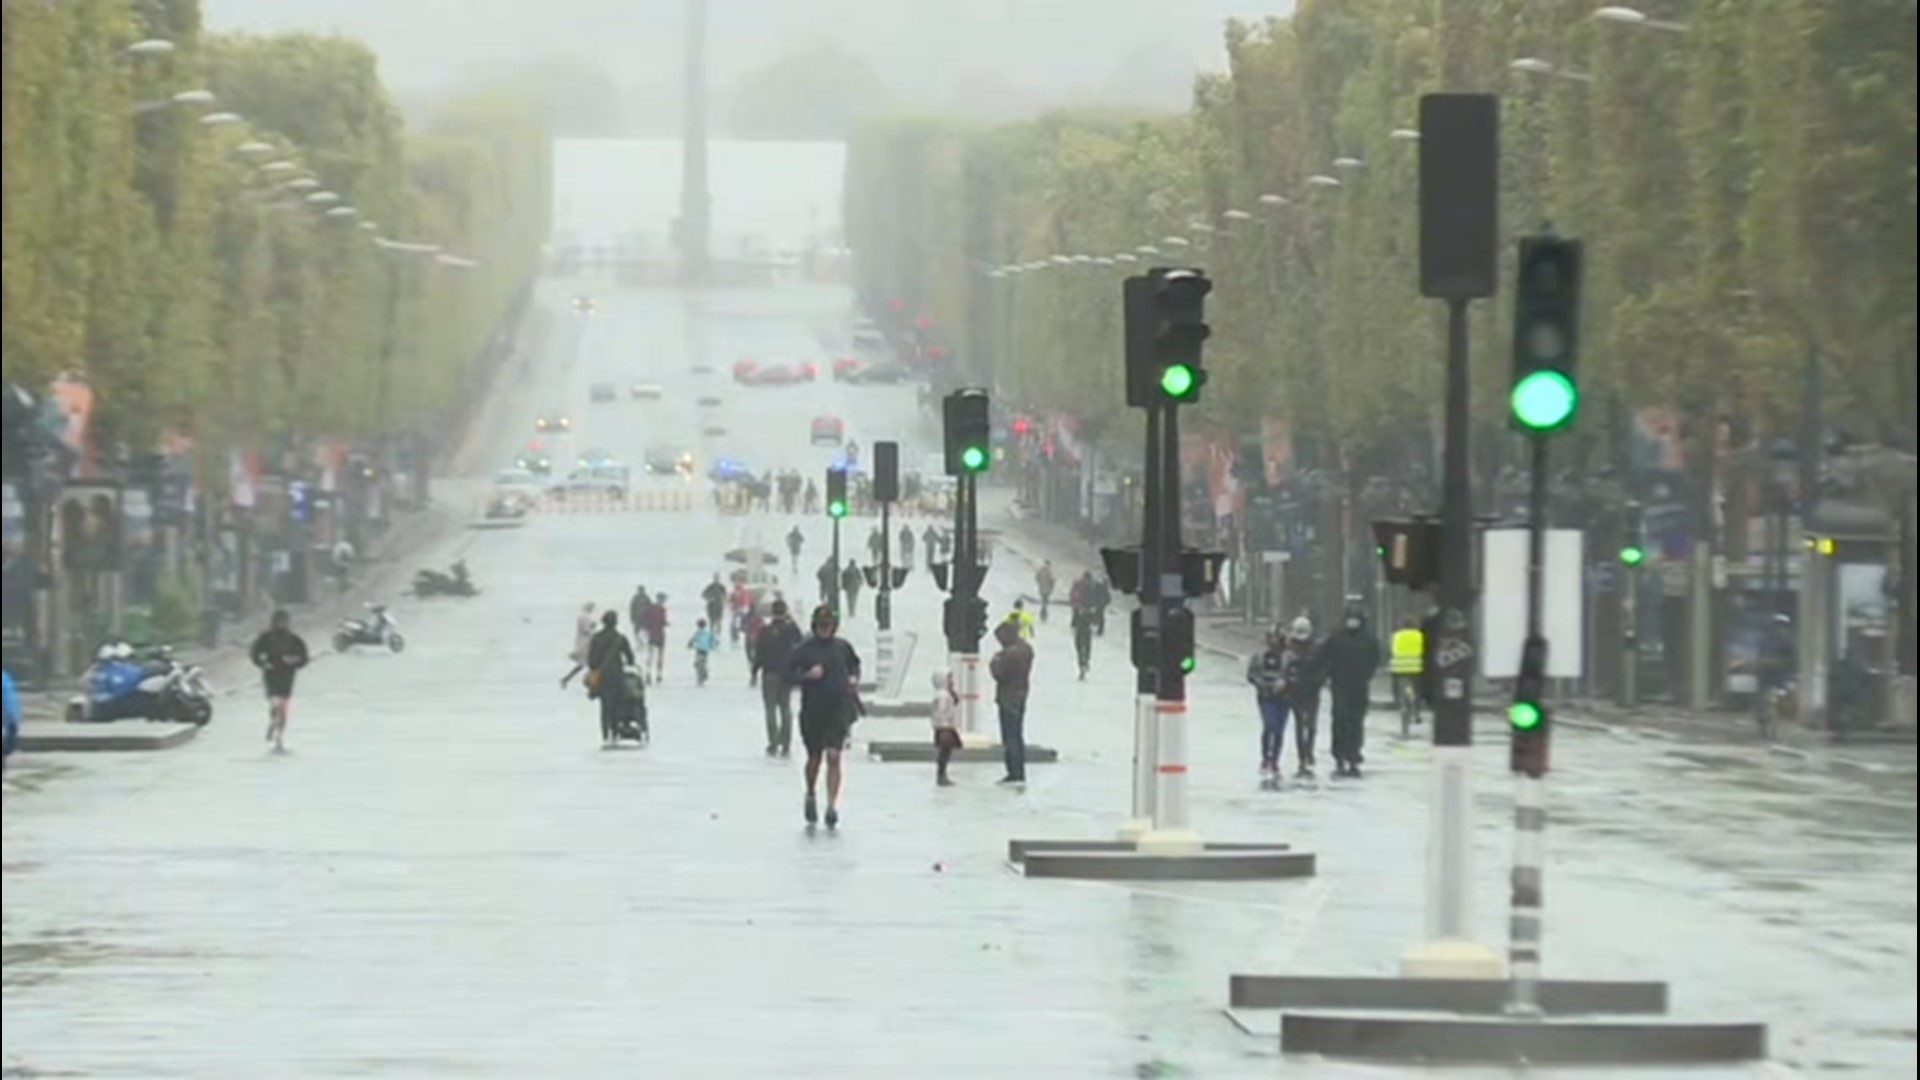 It may have been raining in Paris, France, but that didn't stop residents from getting out and enjoying Car-Free Day, a day in which cars are prohibited across the city, on Sept. 28.